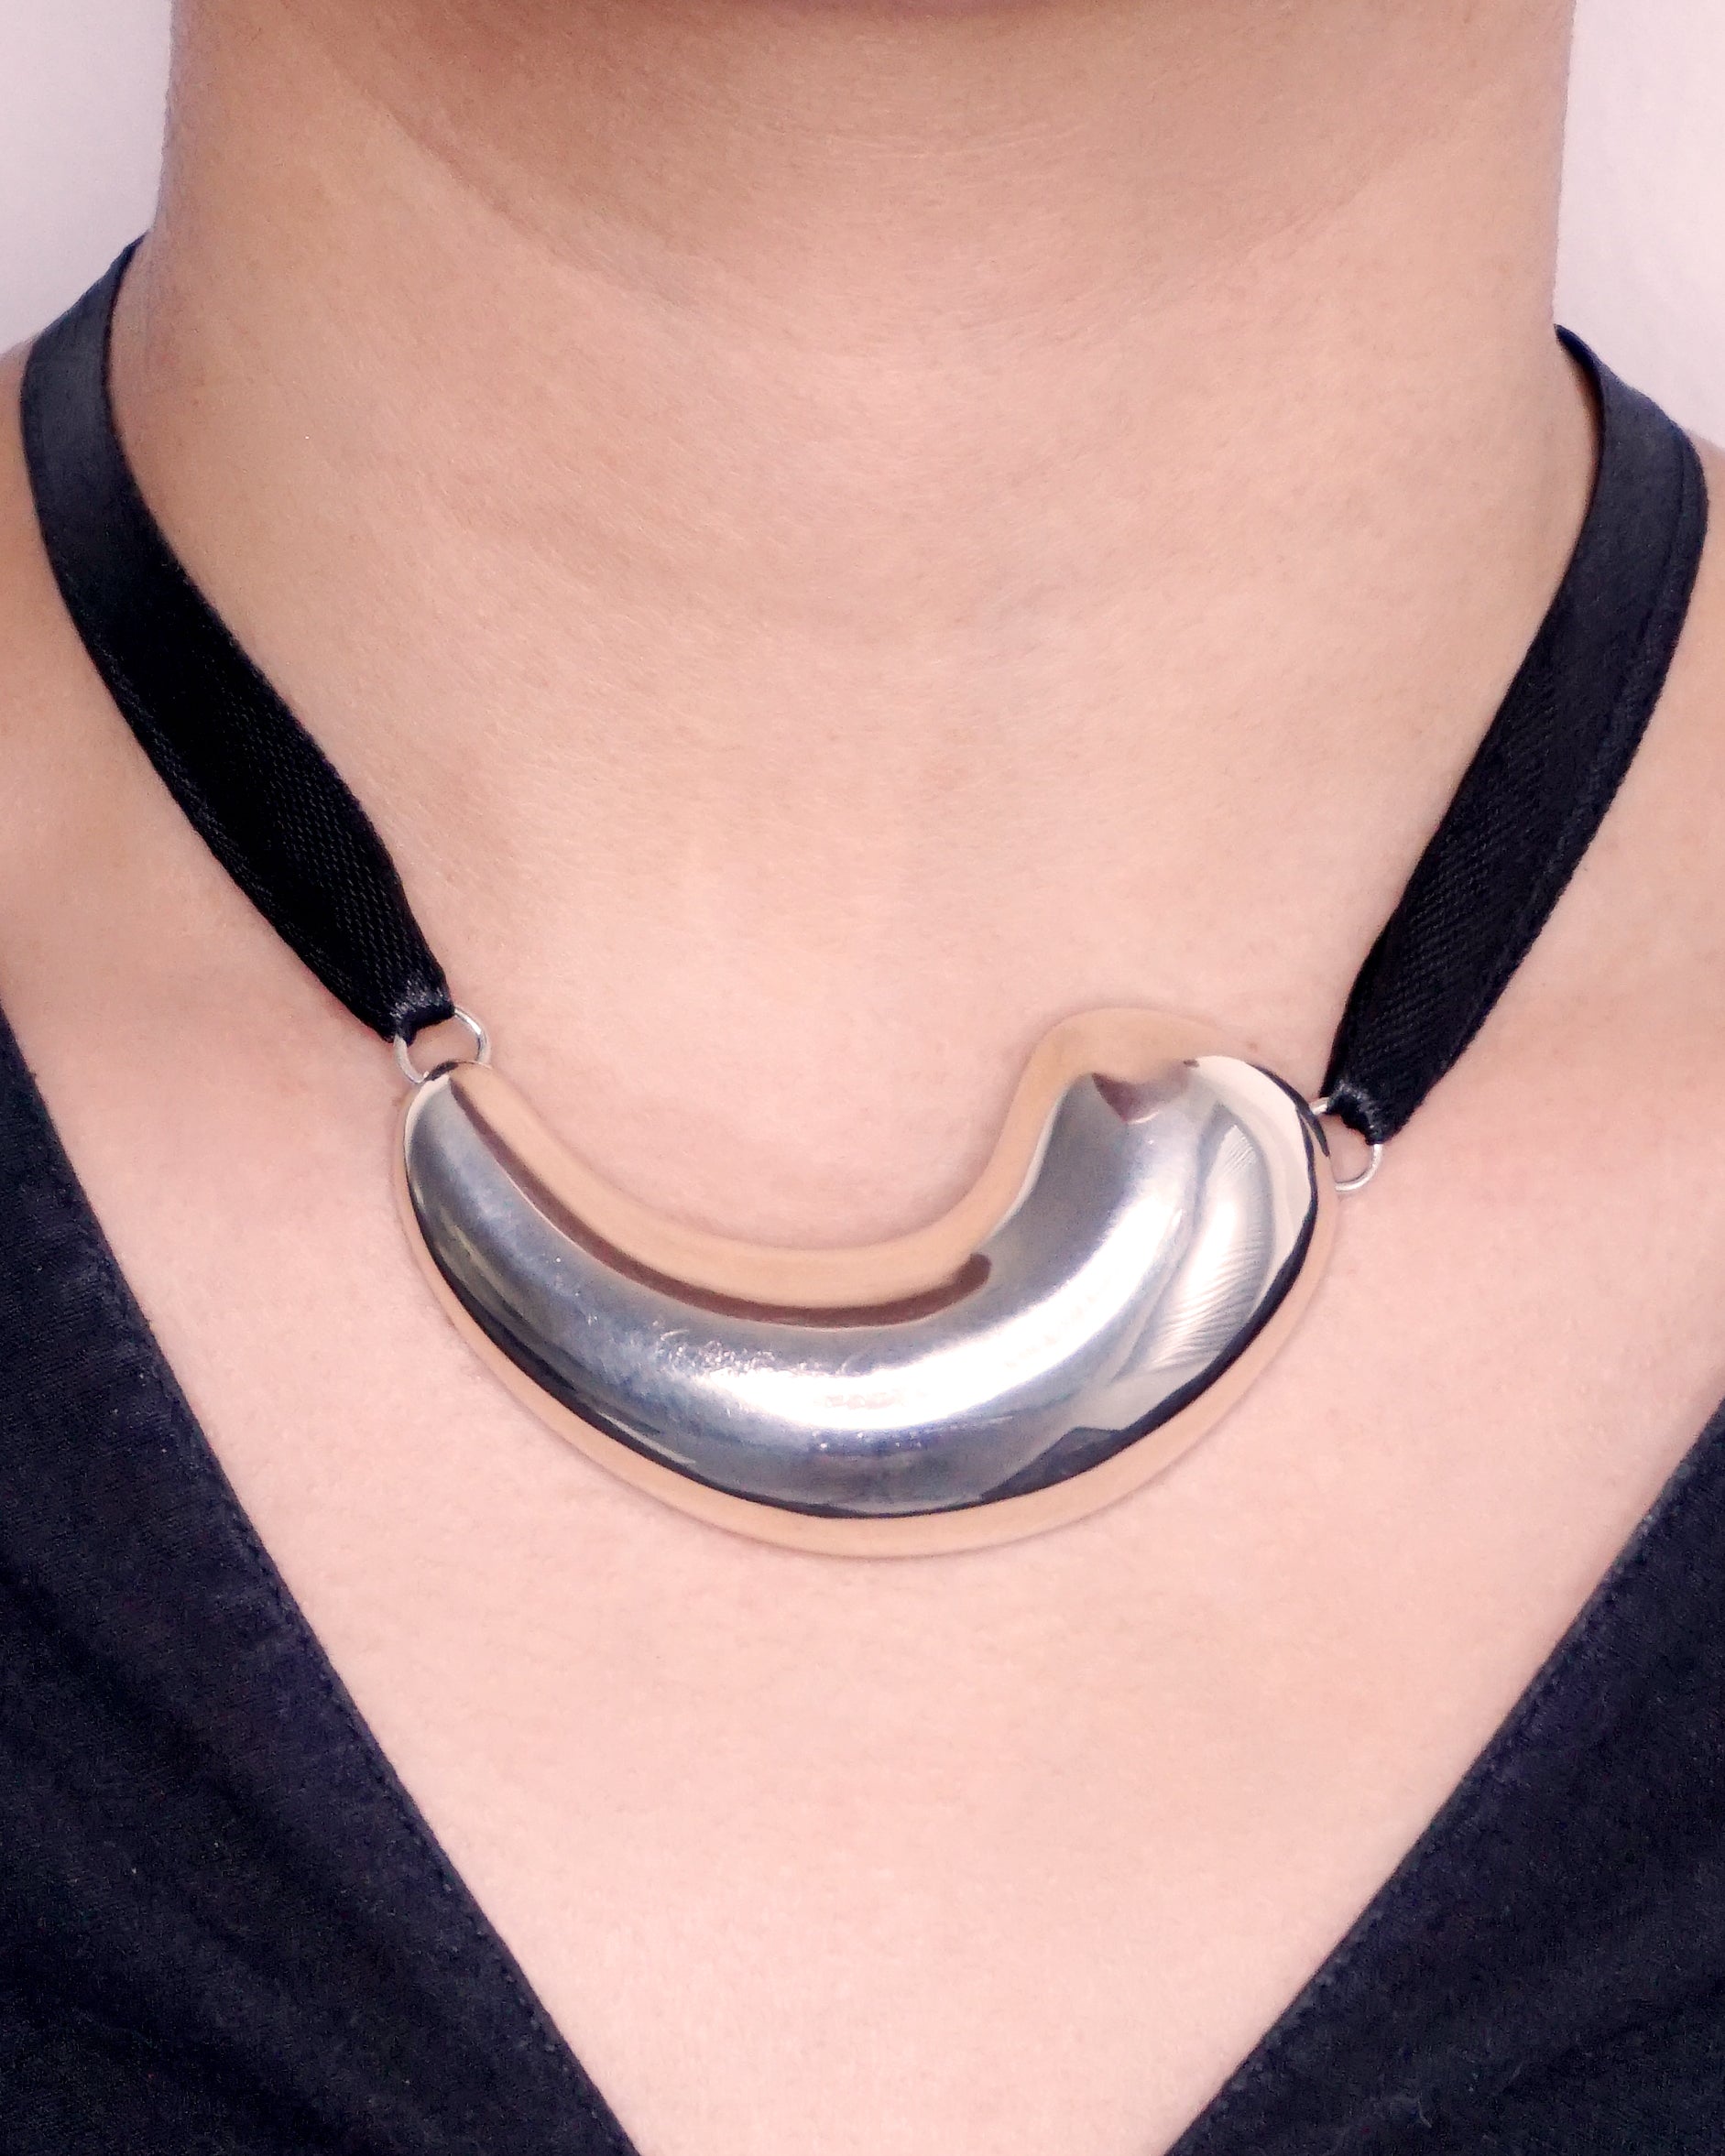 Bean Necklace 2.0 - ISSHU